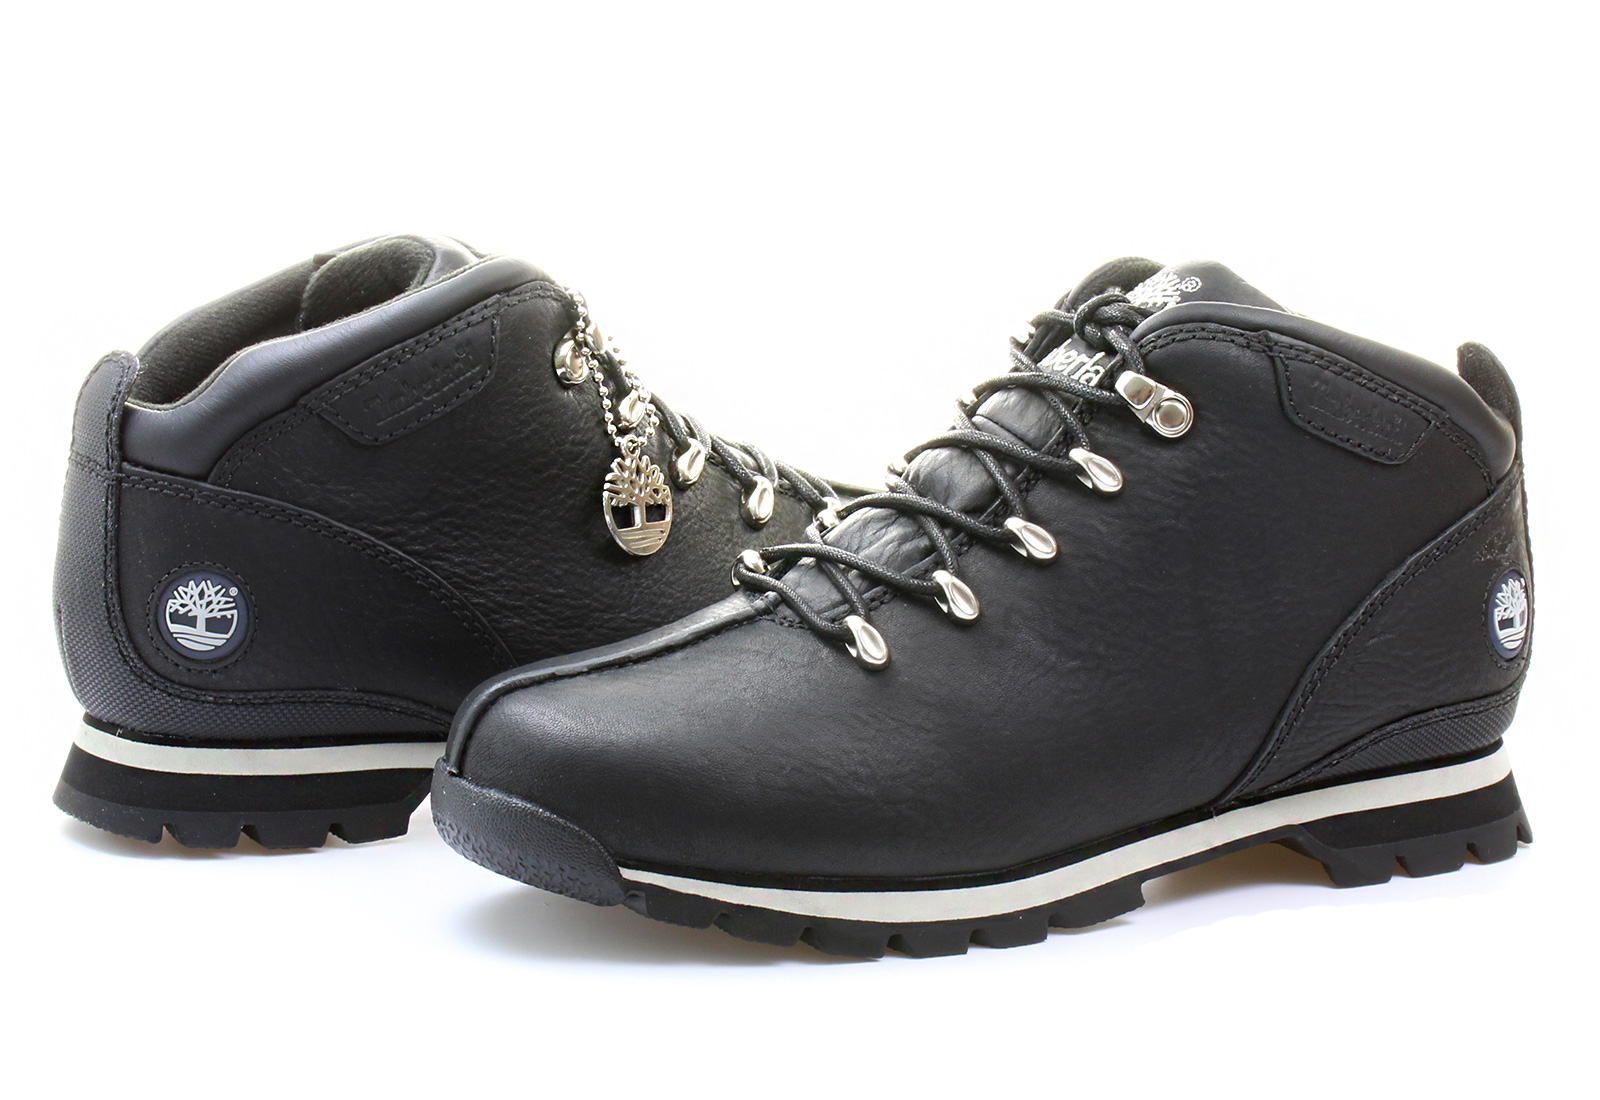 misericordia Rana Crítica Timberland Hikers - Splitrock Hiker - 20599-blk - Online shop for sneakers,  shoes and boots